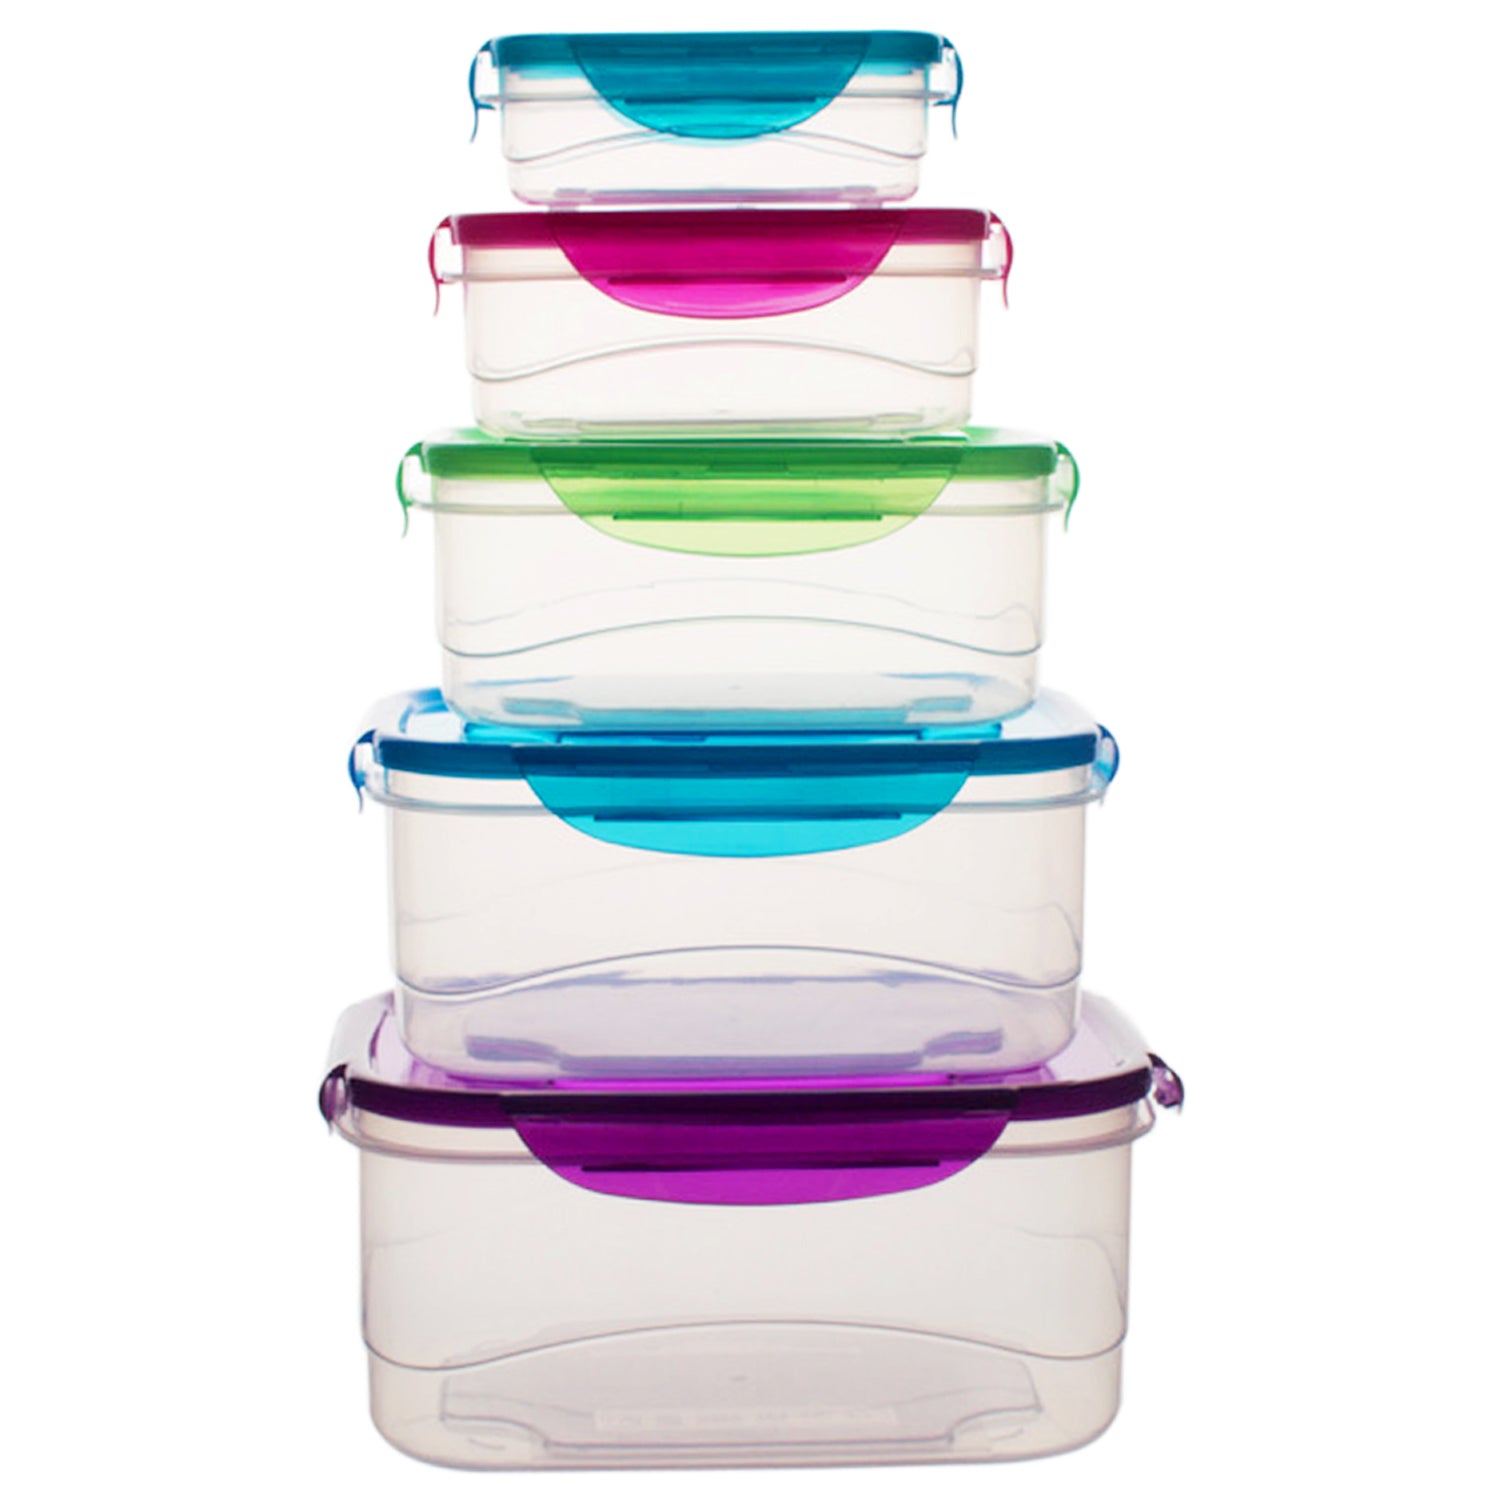 Durable Meal Prep Plastic Food Containers with Snap Lock Lids by Lexi Home  - 32-pc Set, Red - Lexi Home